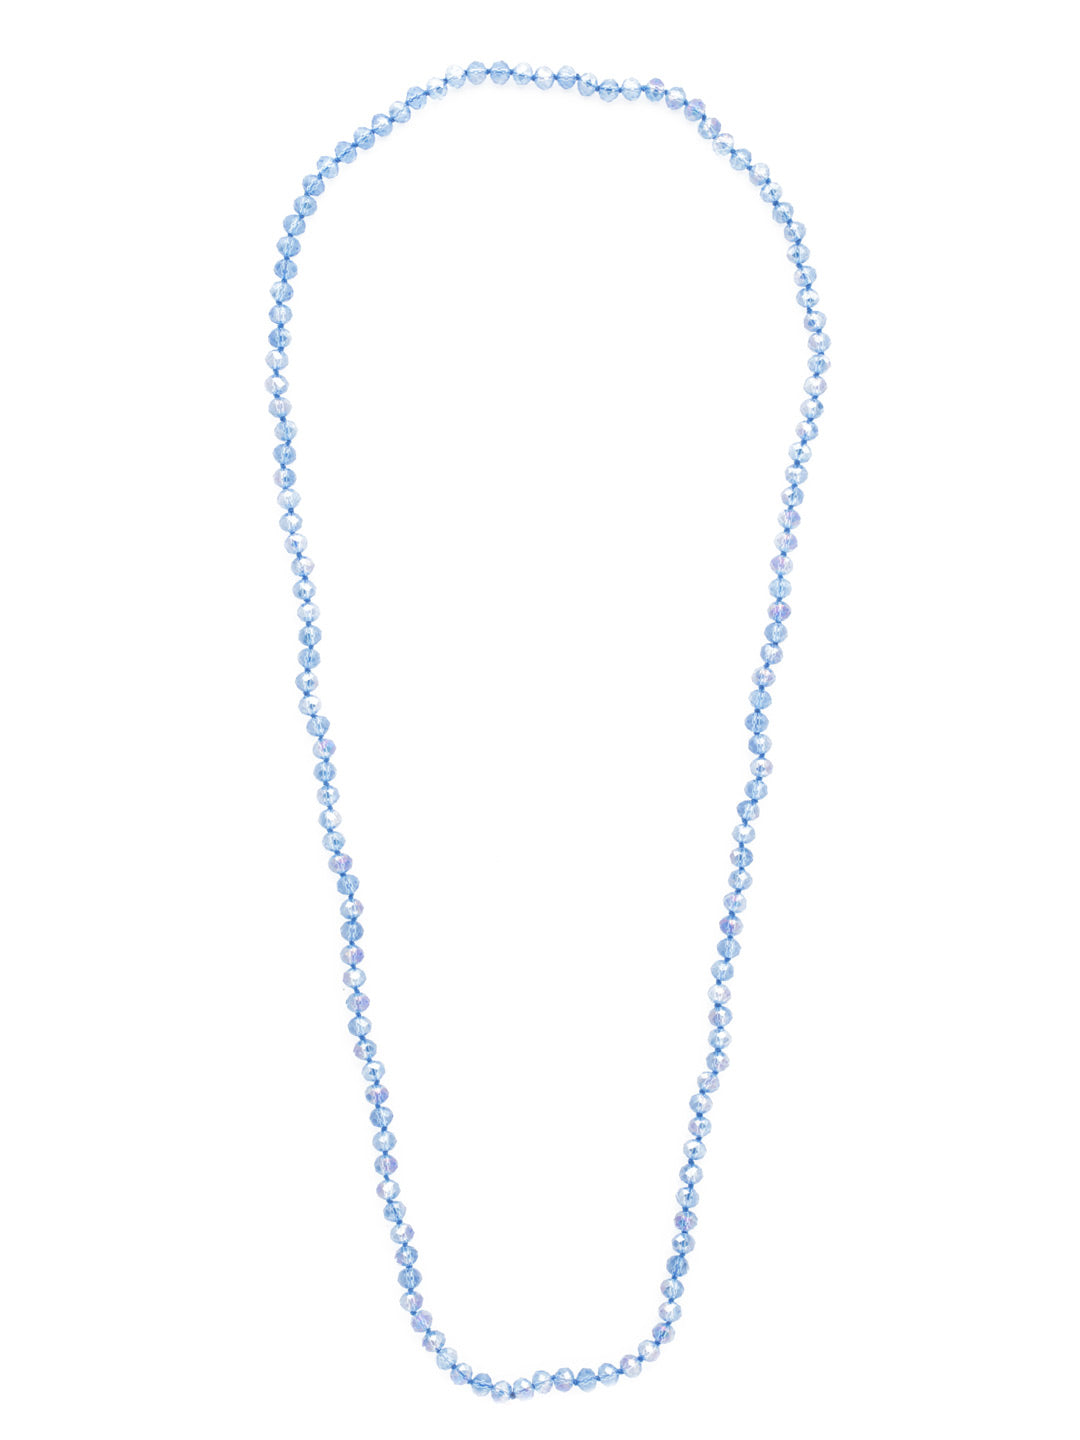 Sandra Long Necklace - NEV43PDWNB - <p>Clearly beautiful. That's our Sandra Long Necklace. The light strand showcases its pure clear beadwork perfectly. This is a piece you'll wear time and time again. From Sorrelli's Windsor Blue collection in our Palladium finish.</p>